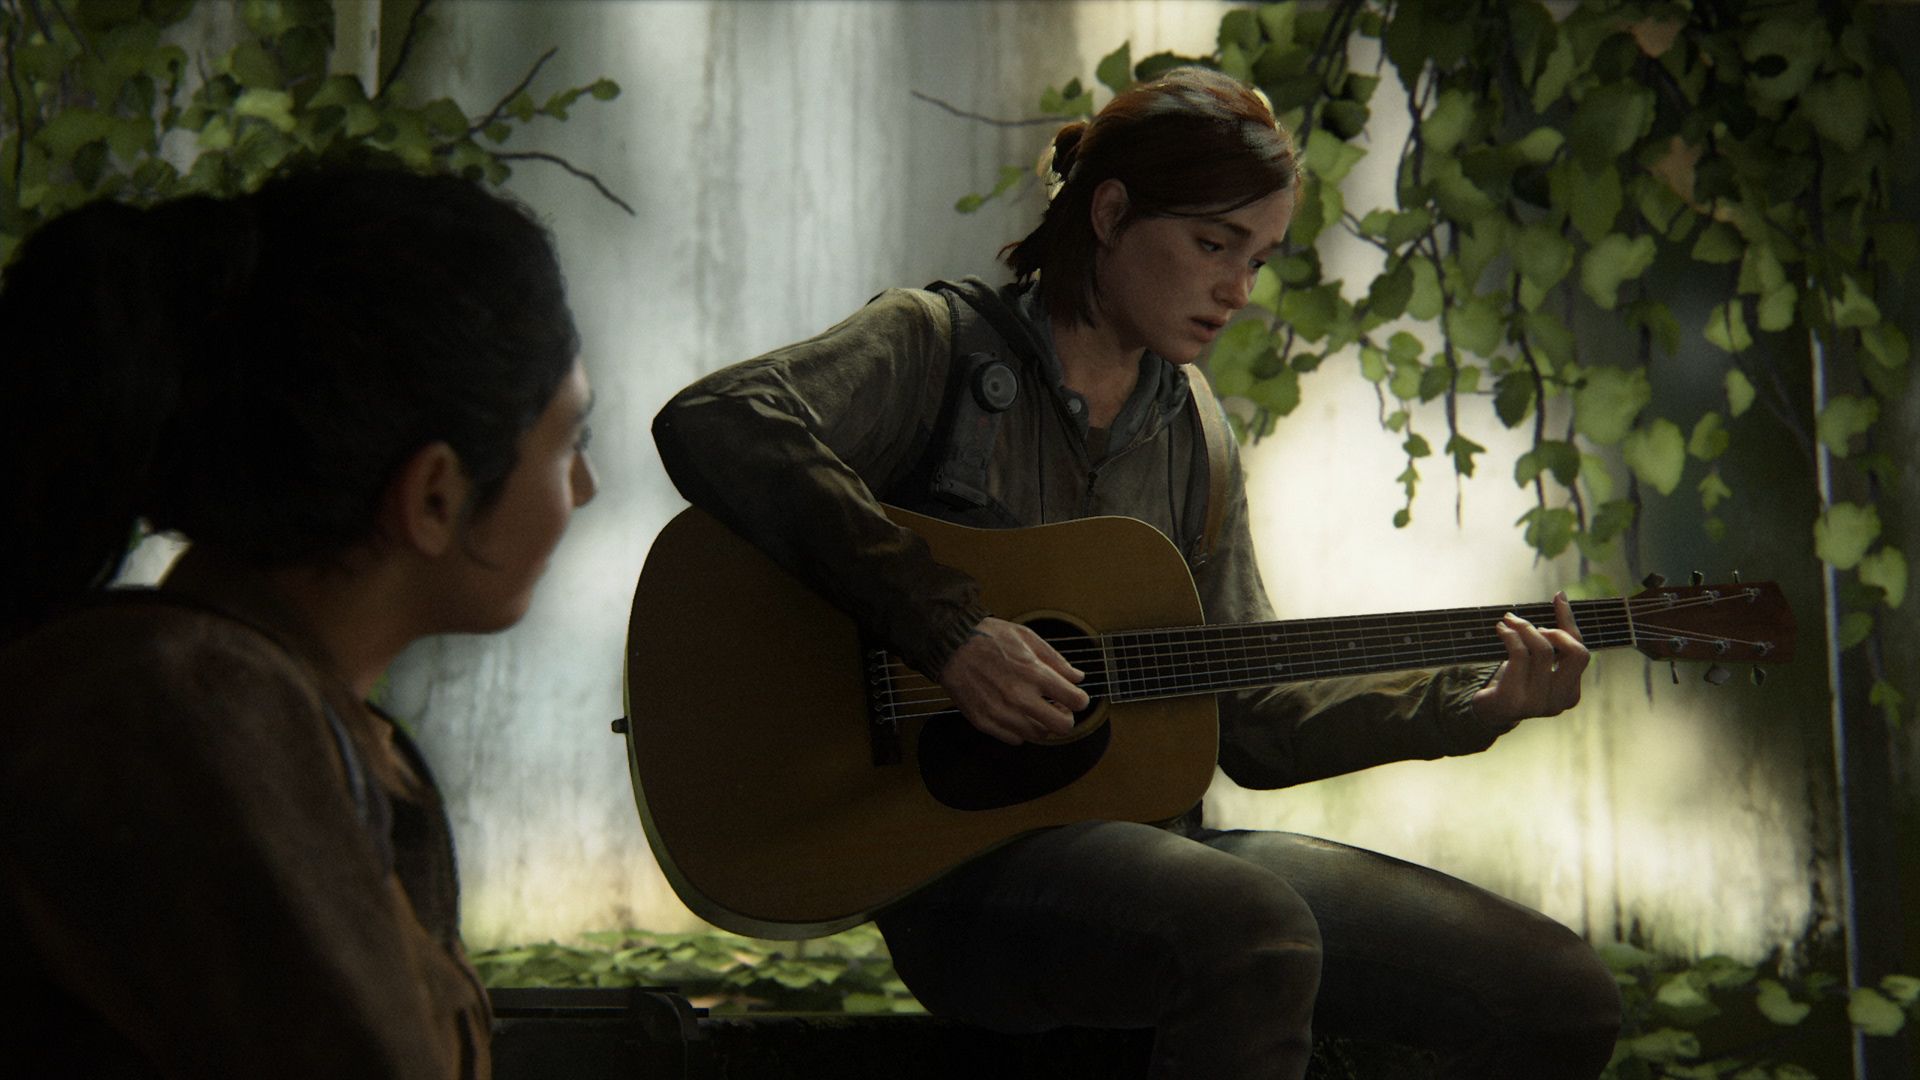 The Last Of Us Part 2: Every Easter Egg And Reference We've Found